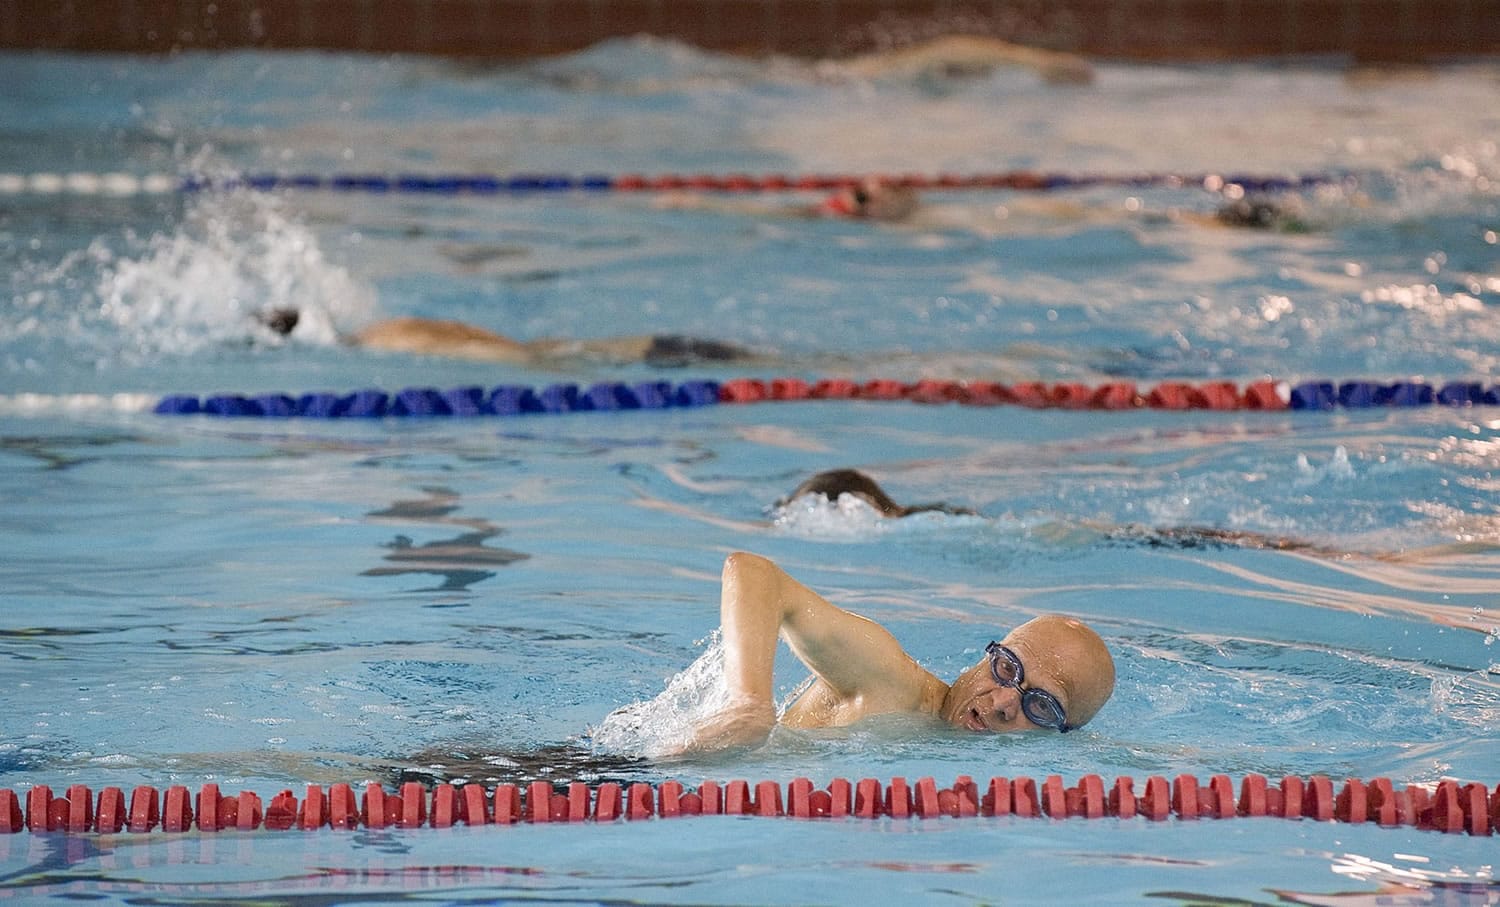 Bharat Kumar of Vancouver swims laps at the Marshall Community Center pool.